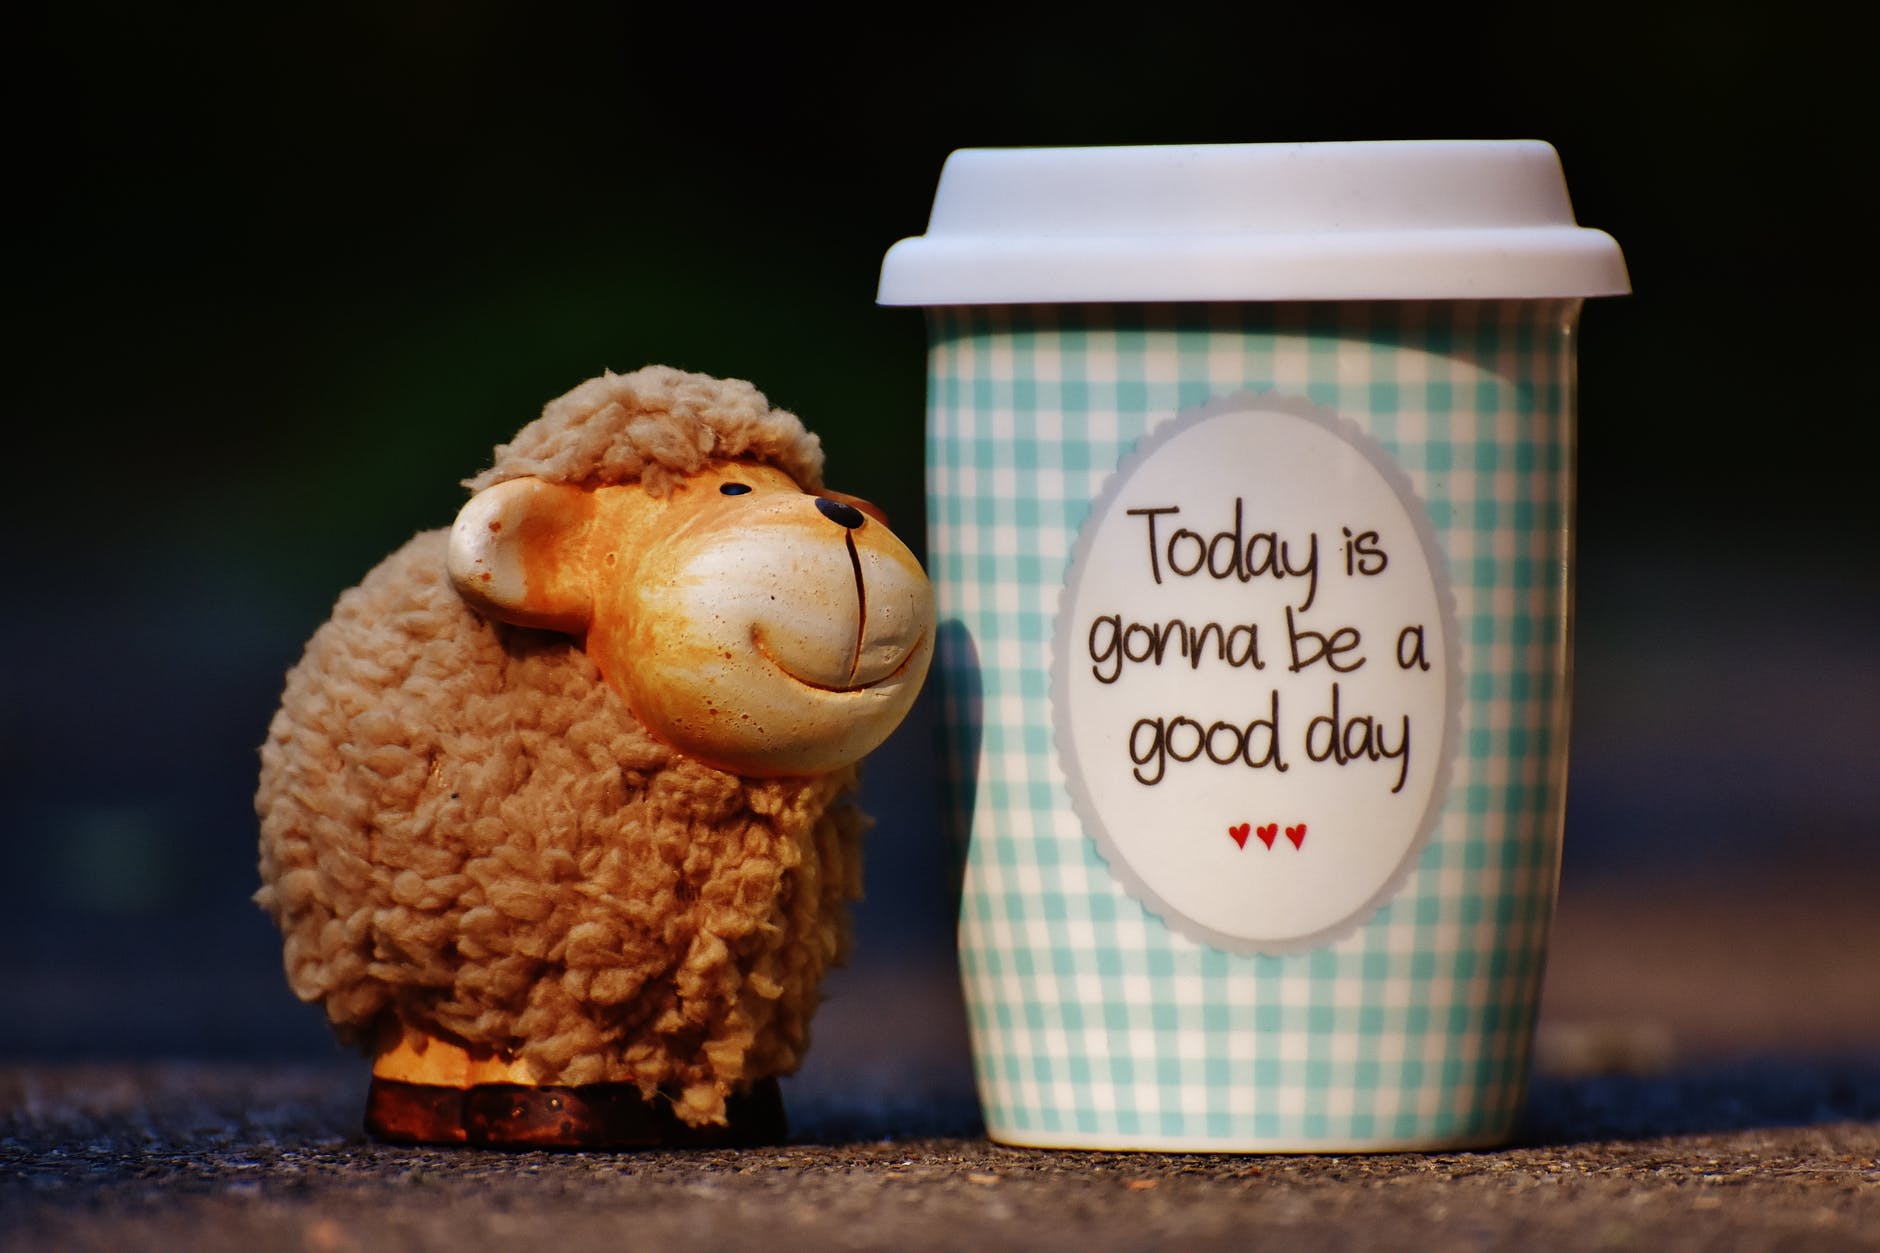 Even a sheeps cup can be running over with positiveness!